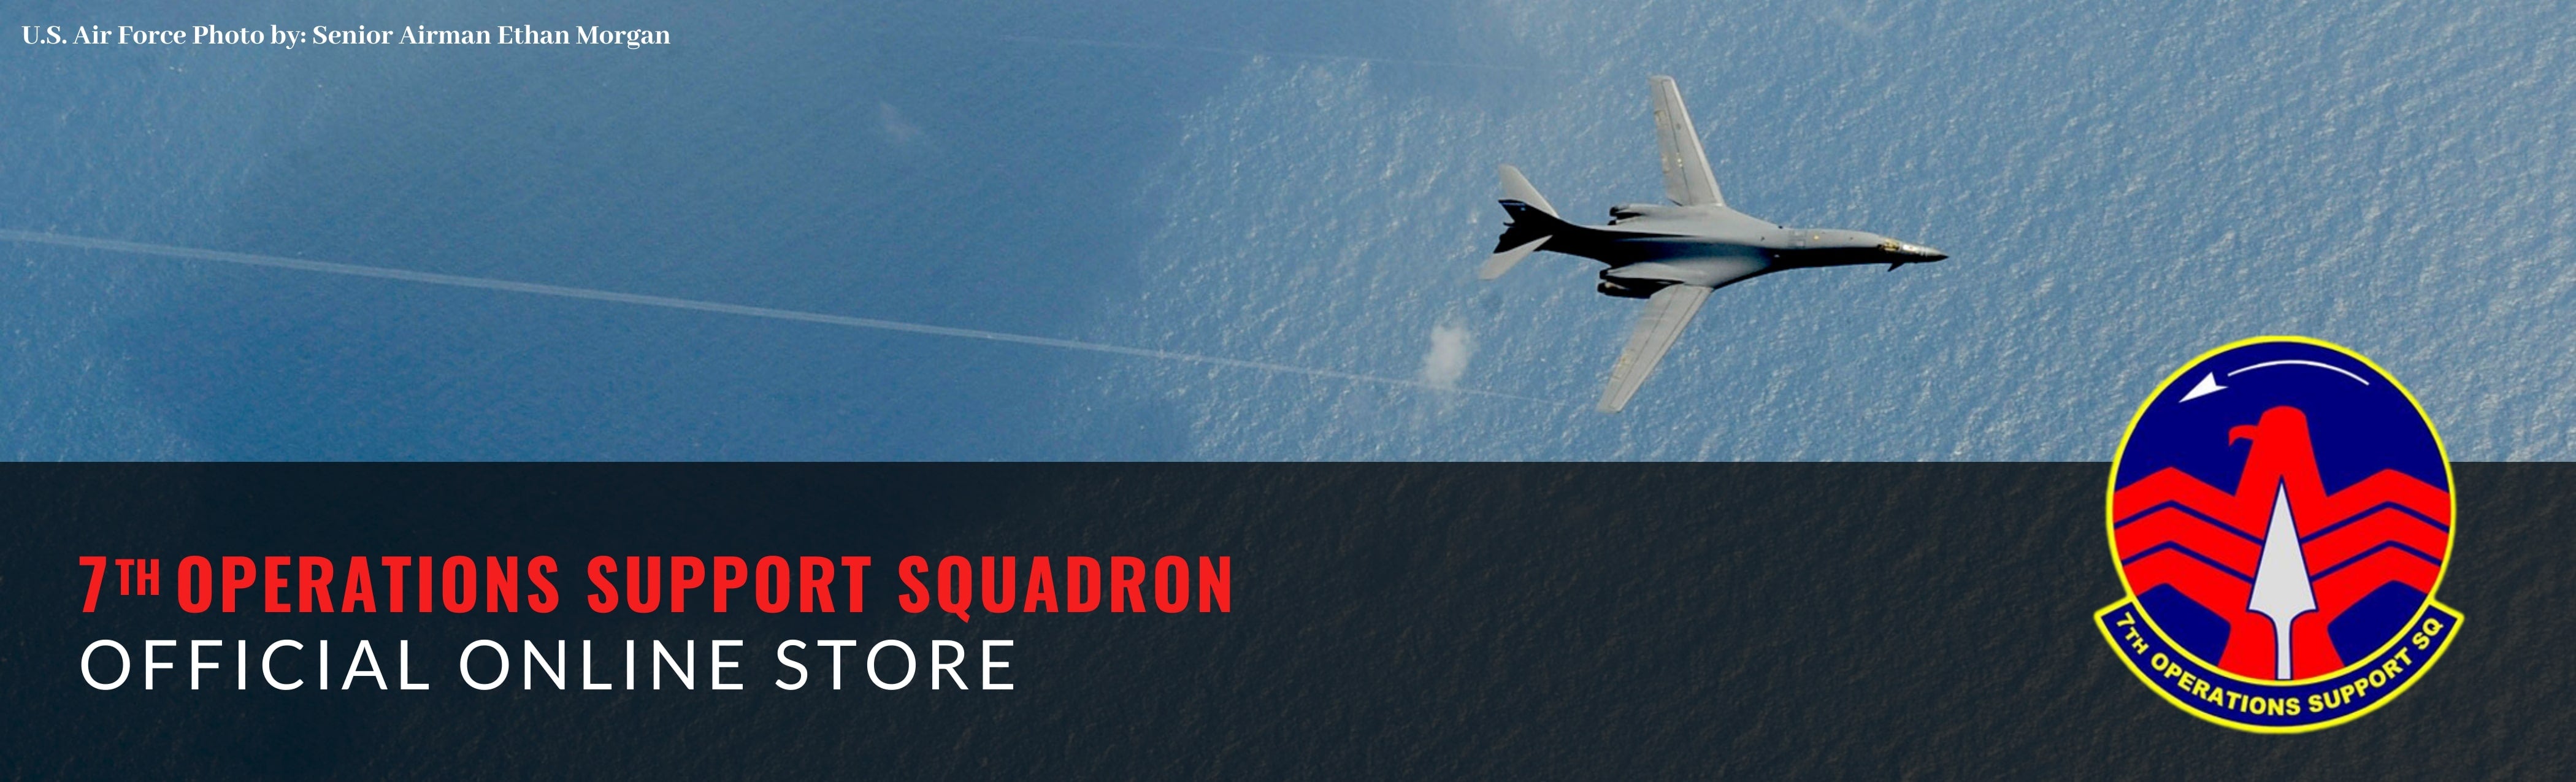 7th Operations Support Squadron